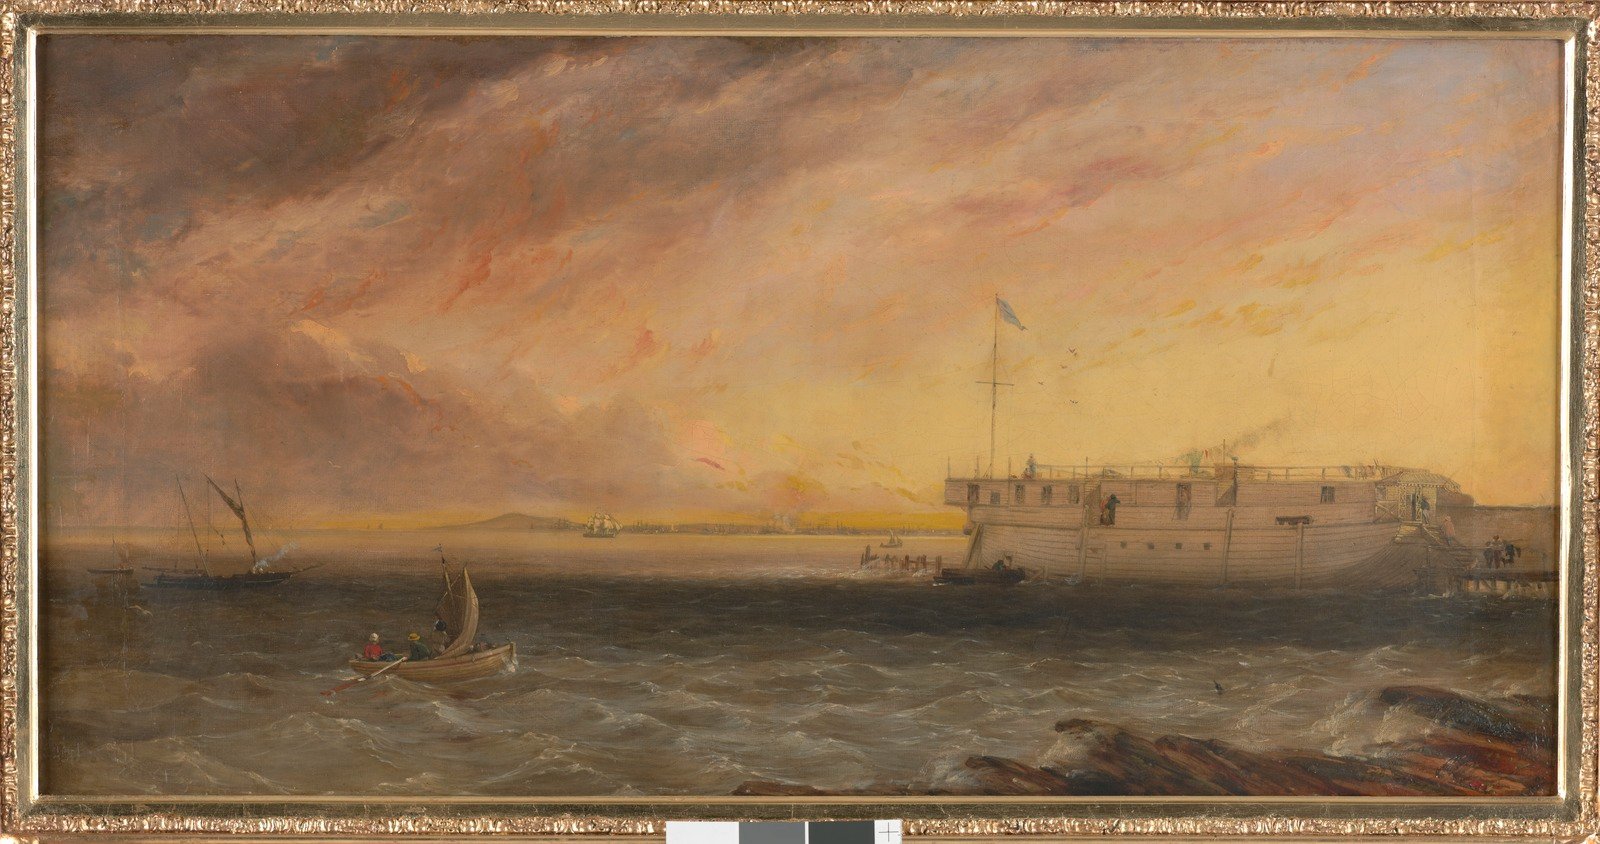 Oil painting depicts Captain Kenney's bathing ship moored at St Kilda Pier 